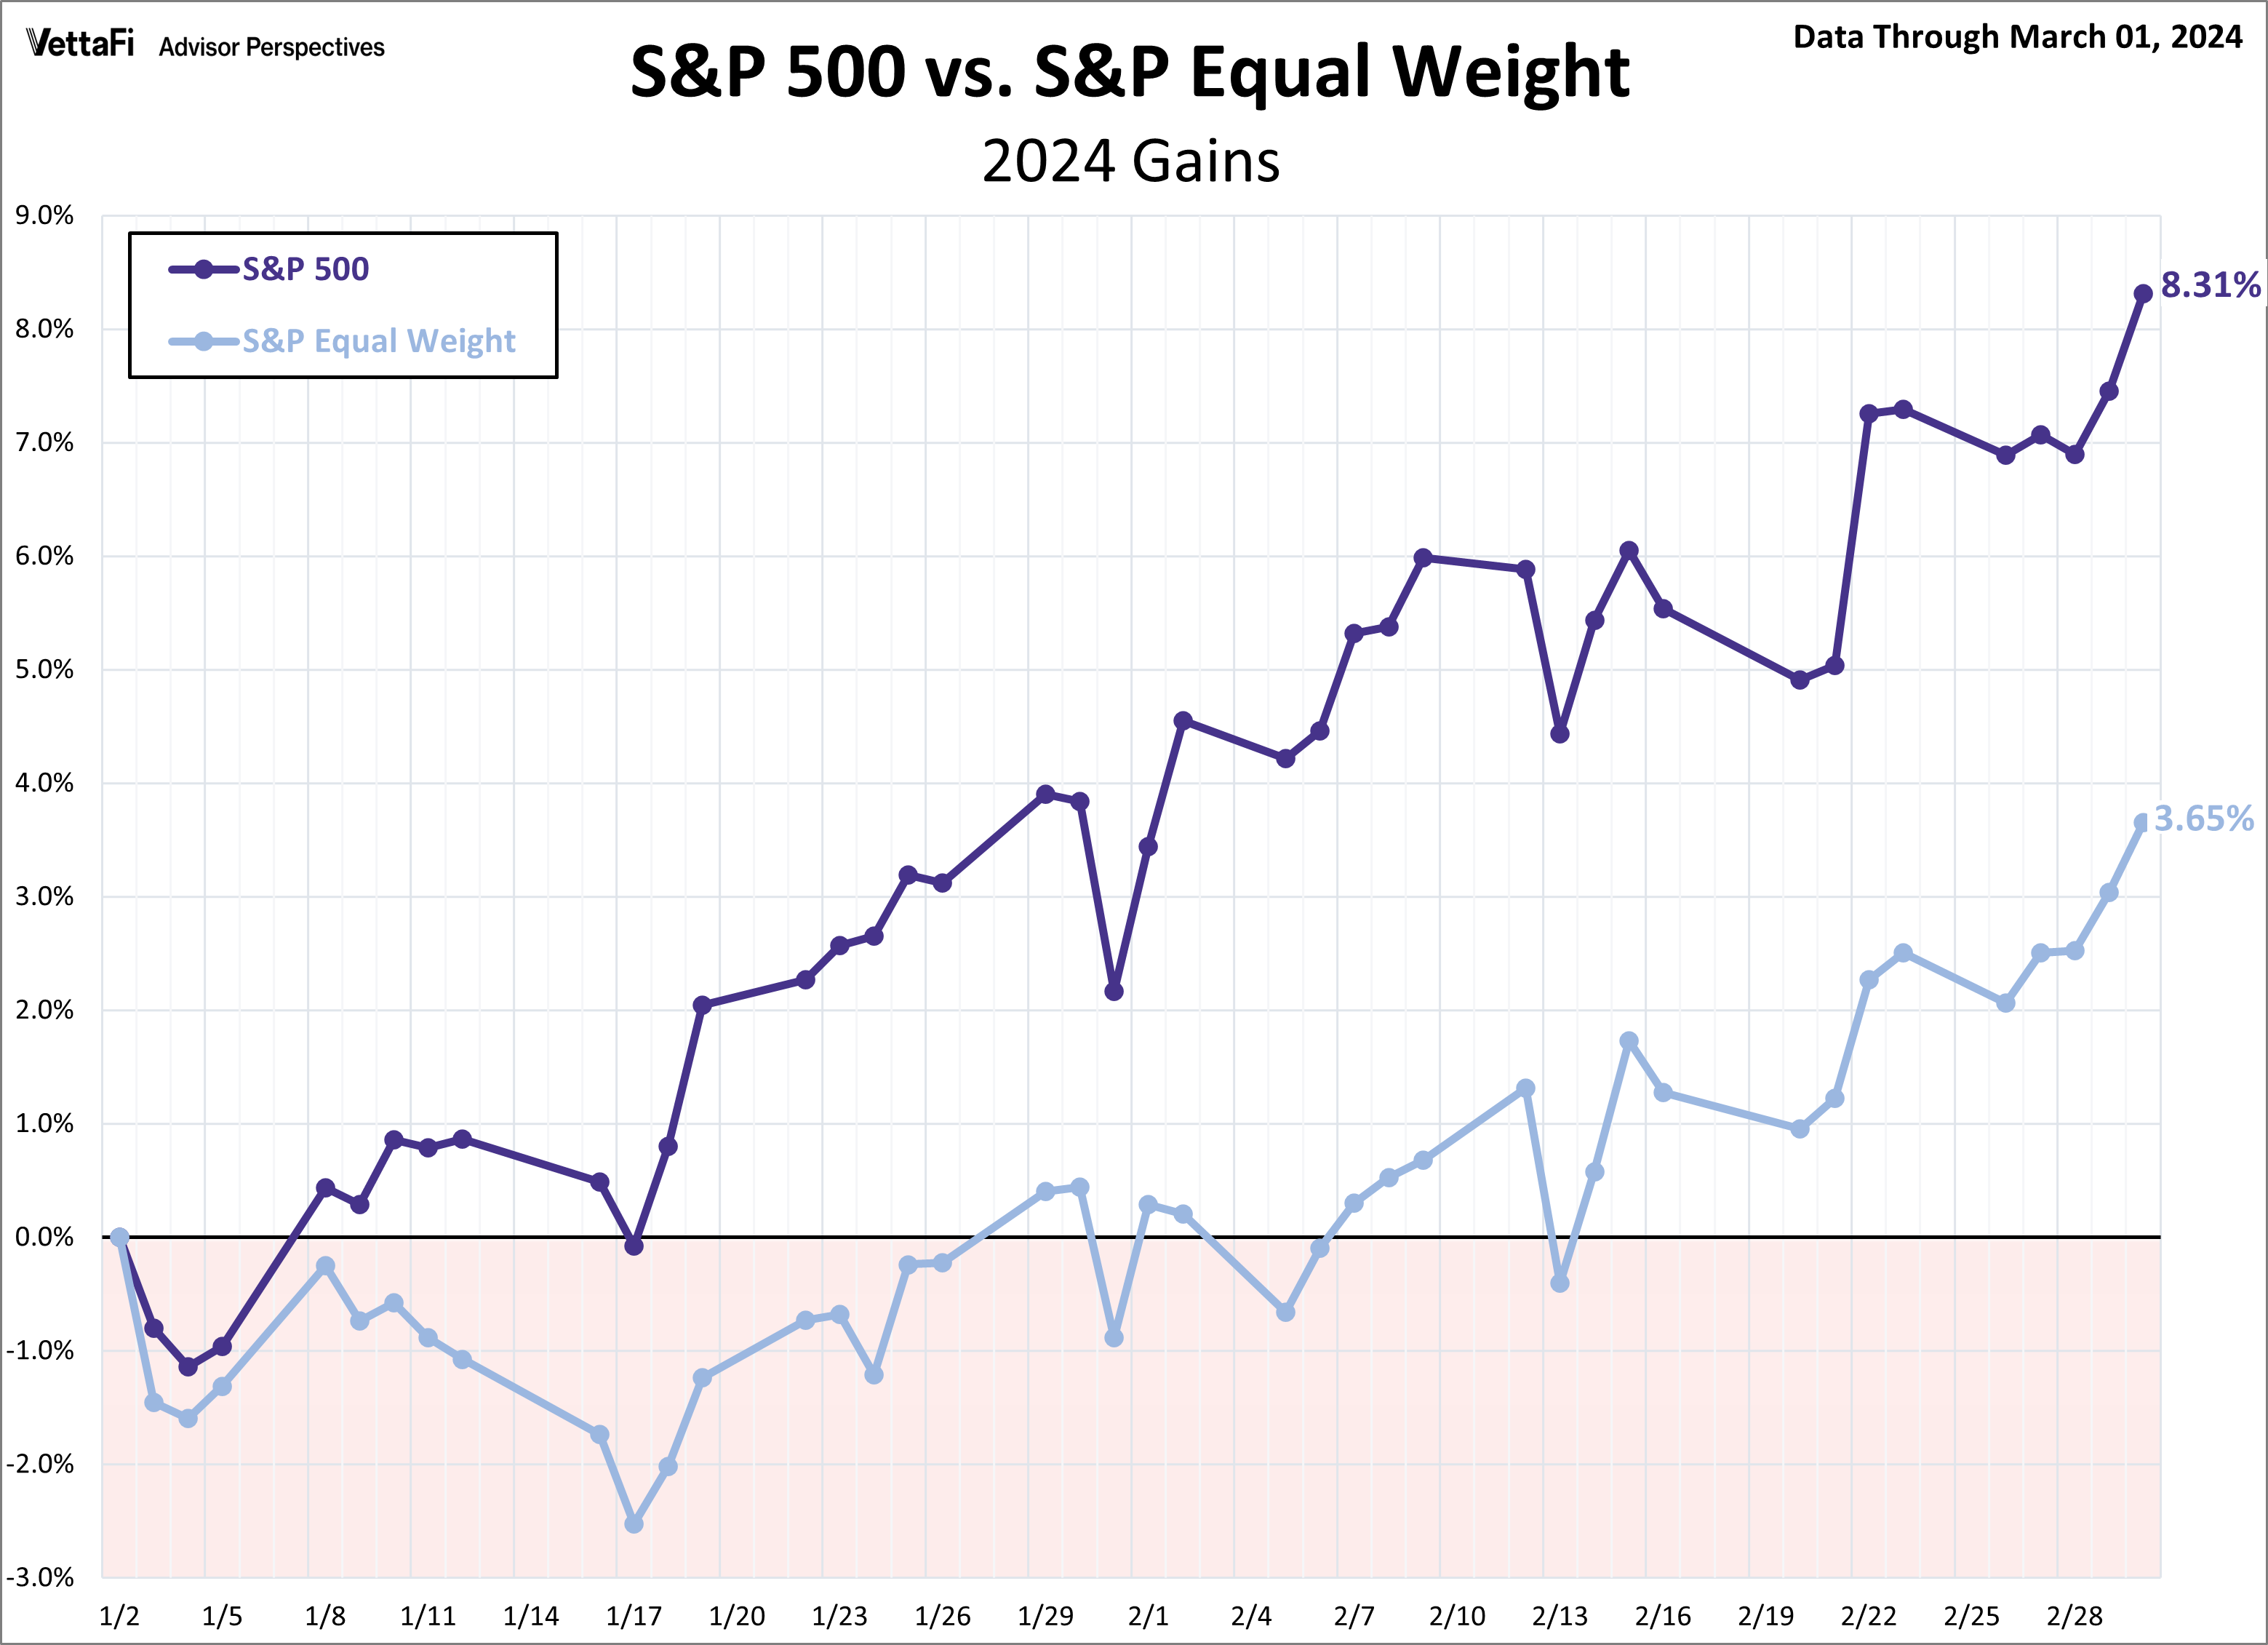 S&P 500 vs S&P Equal Weight: 2024 Gains